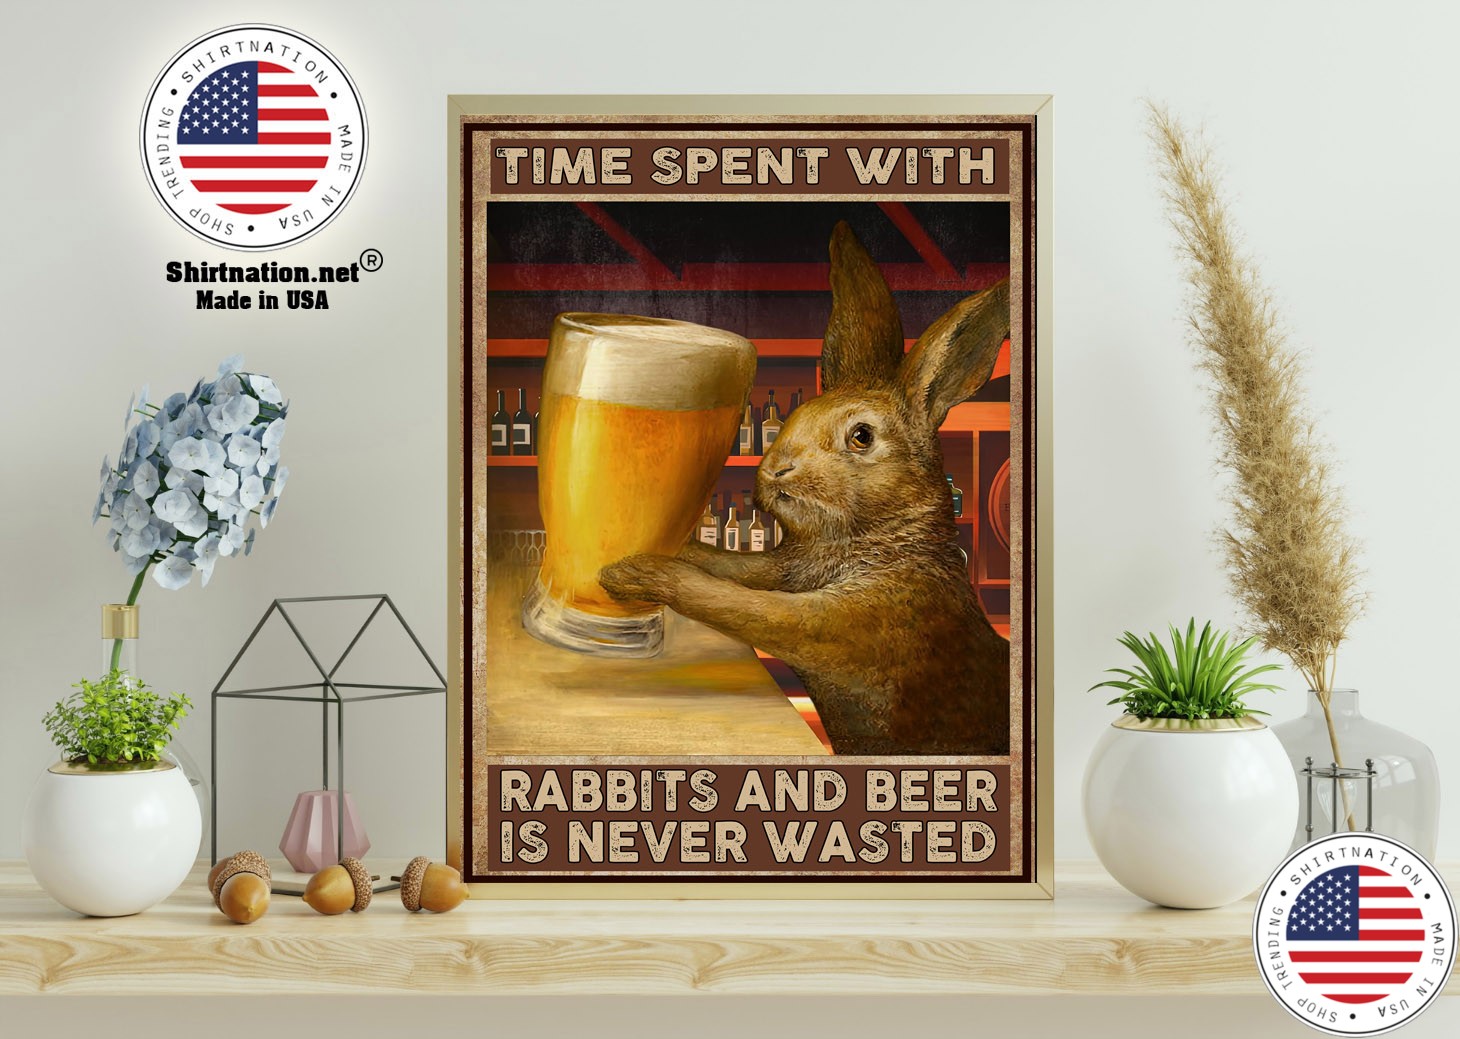 Time spent with rabbits and beer is never wasted poster 11